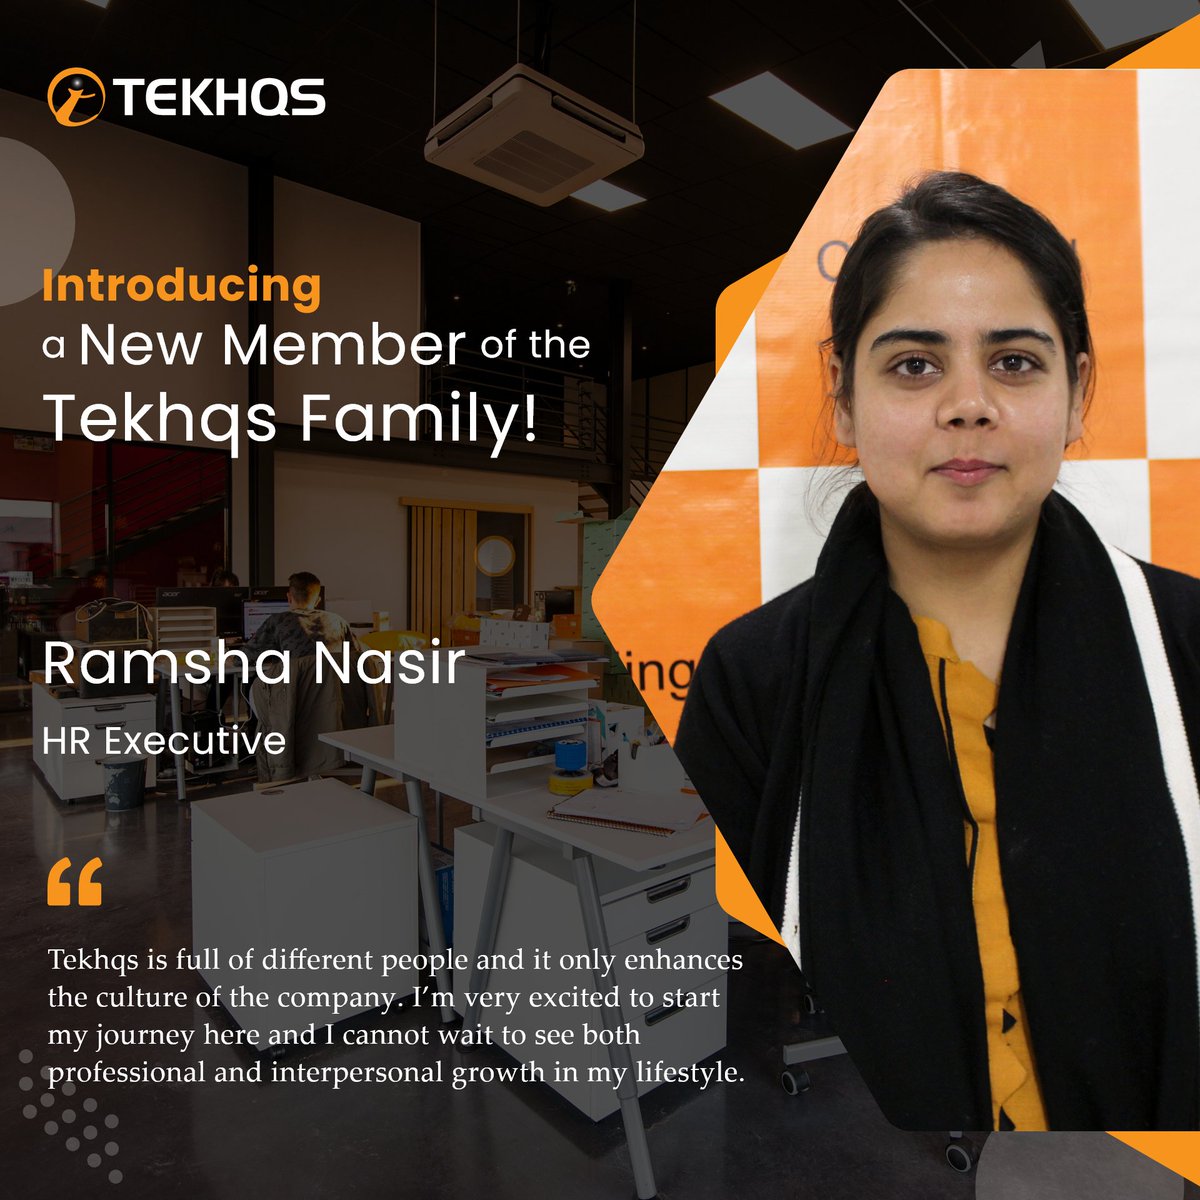 Ramsha Nasir has joined Tekhqs as an HR executive. Congratulations and welcome aboard. We can’t wait to see all that you’ll achieve!
Welcome Aboard, Ramsha!
Learn more about us: https://t.co/2UeNxufVj6
#newjoining #growtogether #teamwork #teamplayer #tekhqs #humanresources https://t.co/qSyhHYAwiJ.